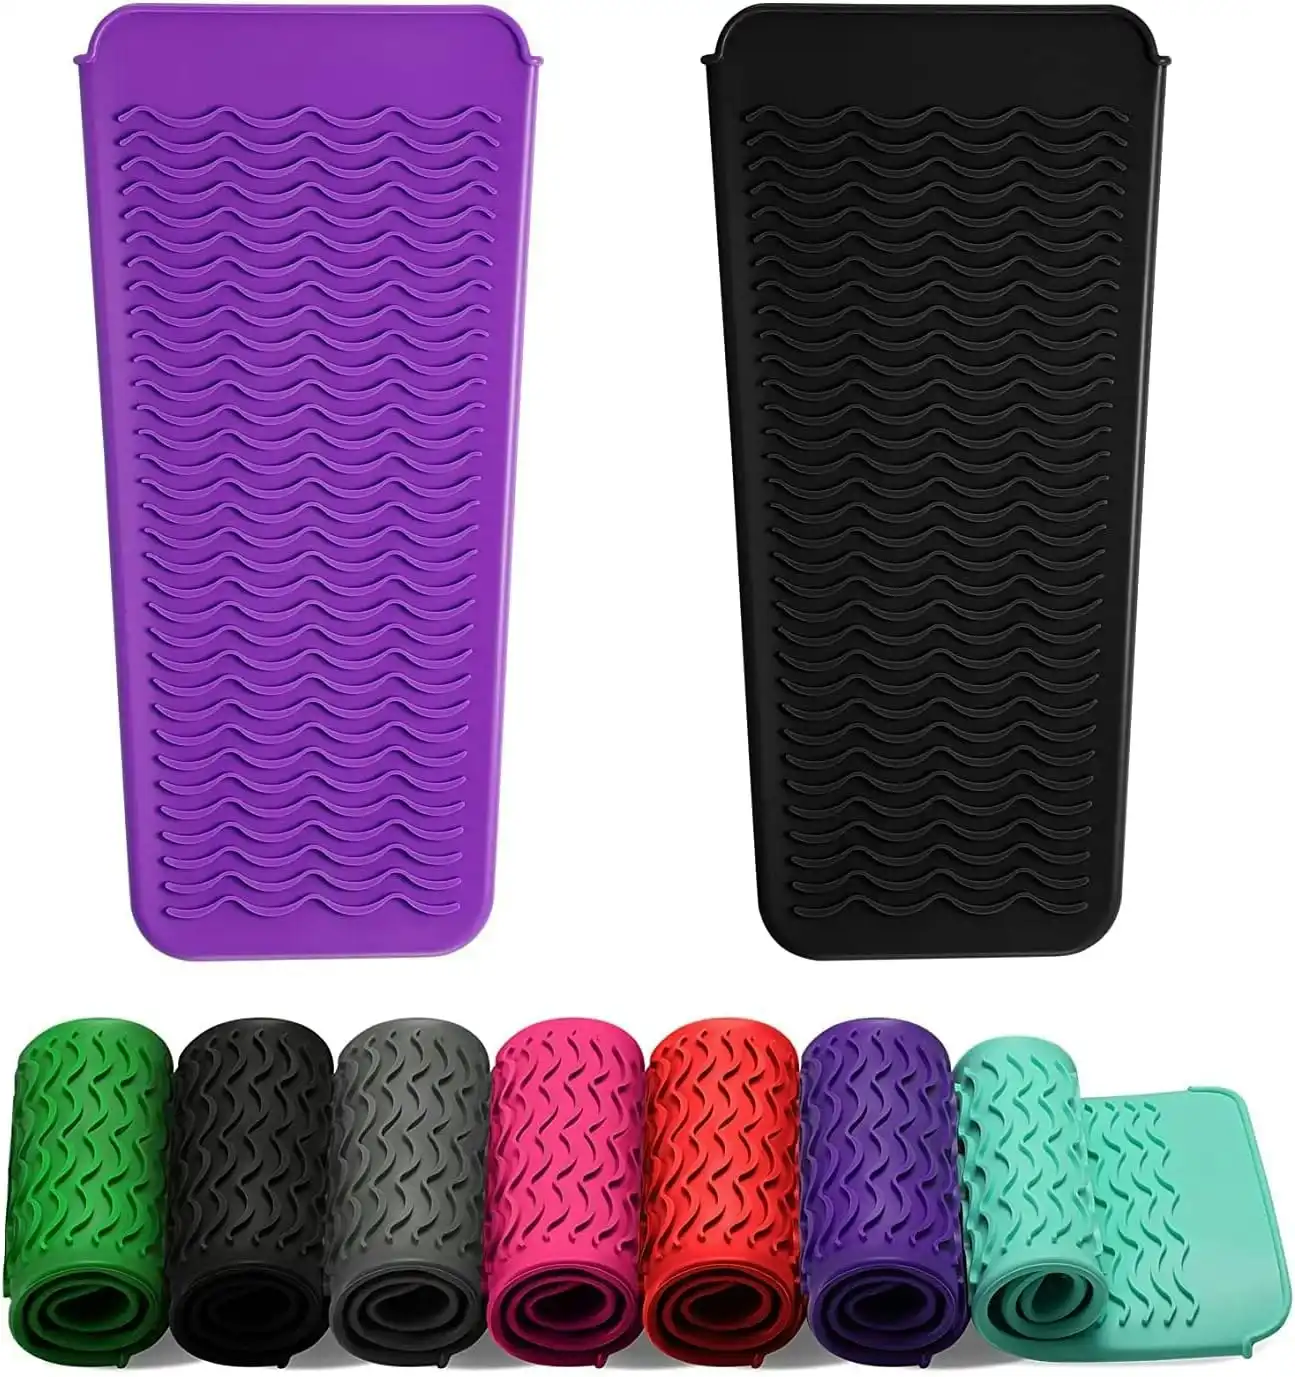 2 Pack Heat Resistant Silicone Mat Pouch for Flat Iron, Curling Iron,Hair Straightener,Hair Curling Wands,Hot Hair Tools (Purple & Black)